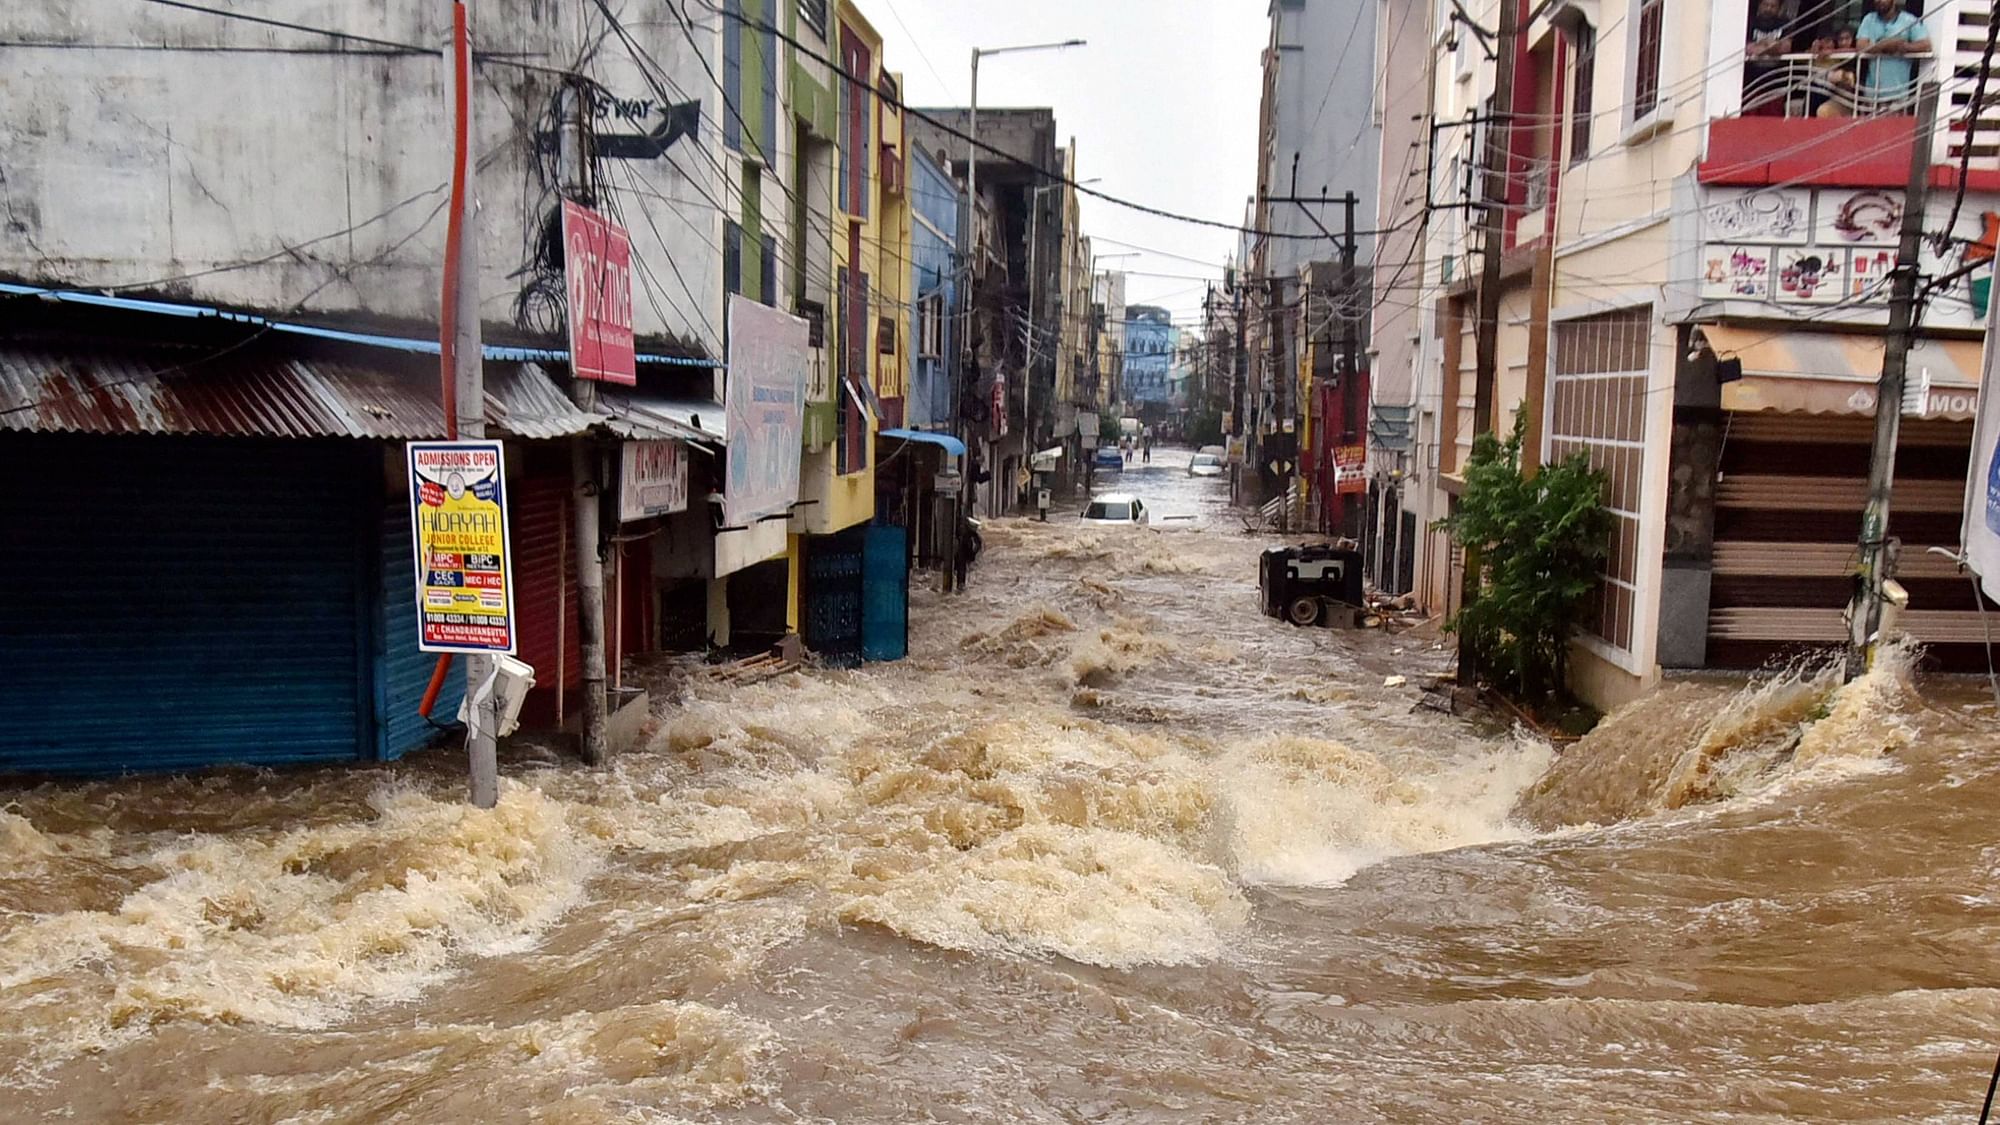  Floodwater gushes through a street following heavy rains, at Falaknuma, in Hyderabad, Wednesday, 14 October 2020.